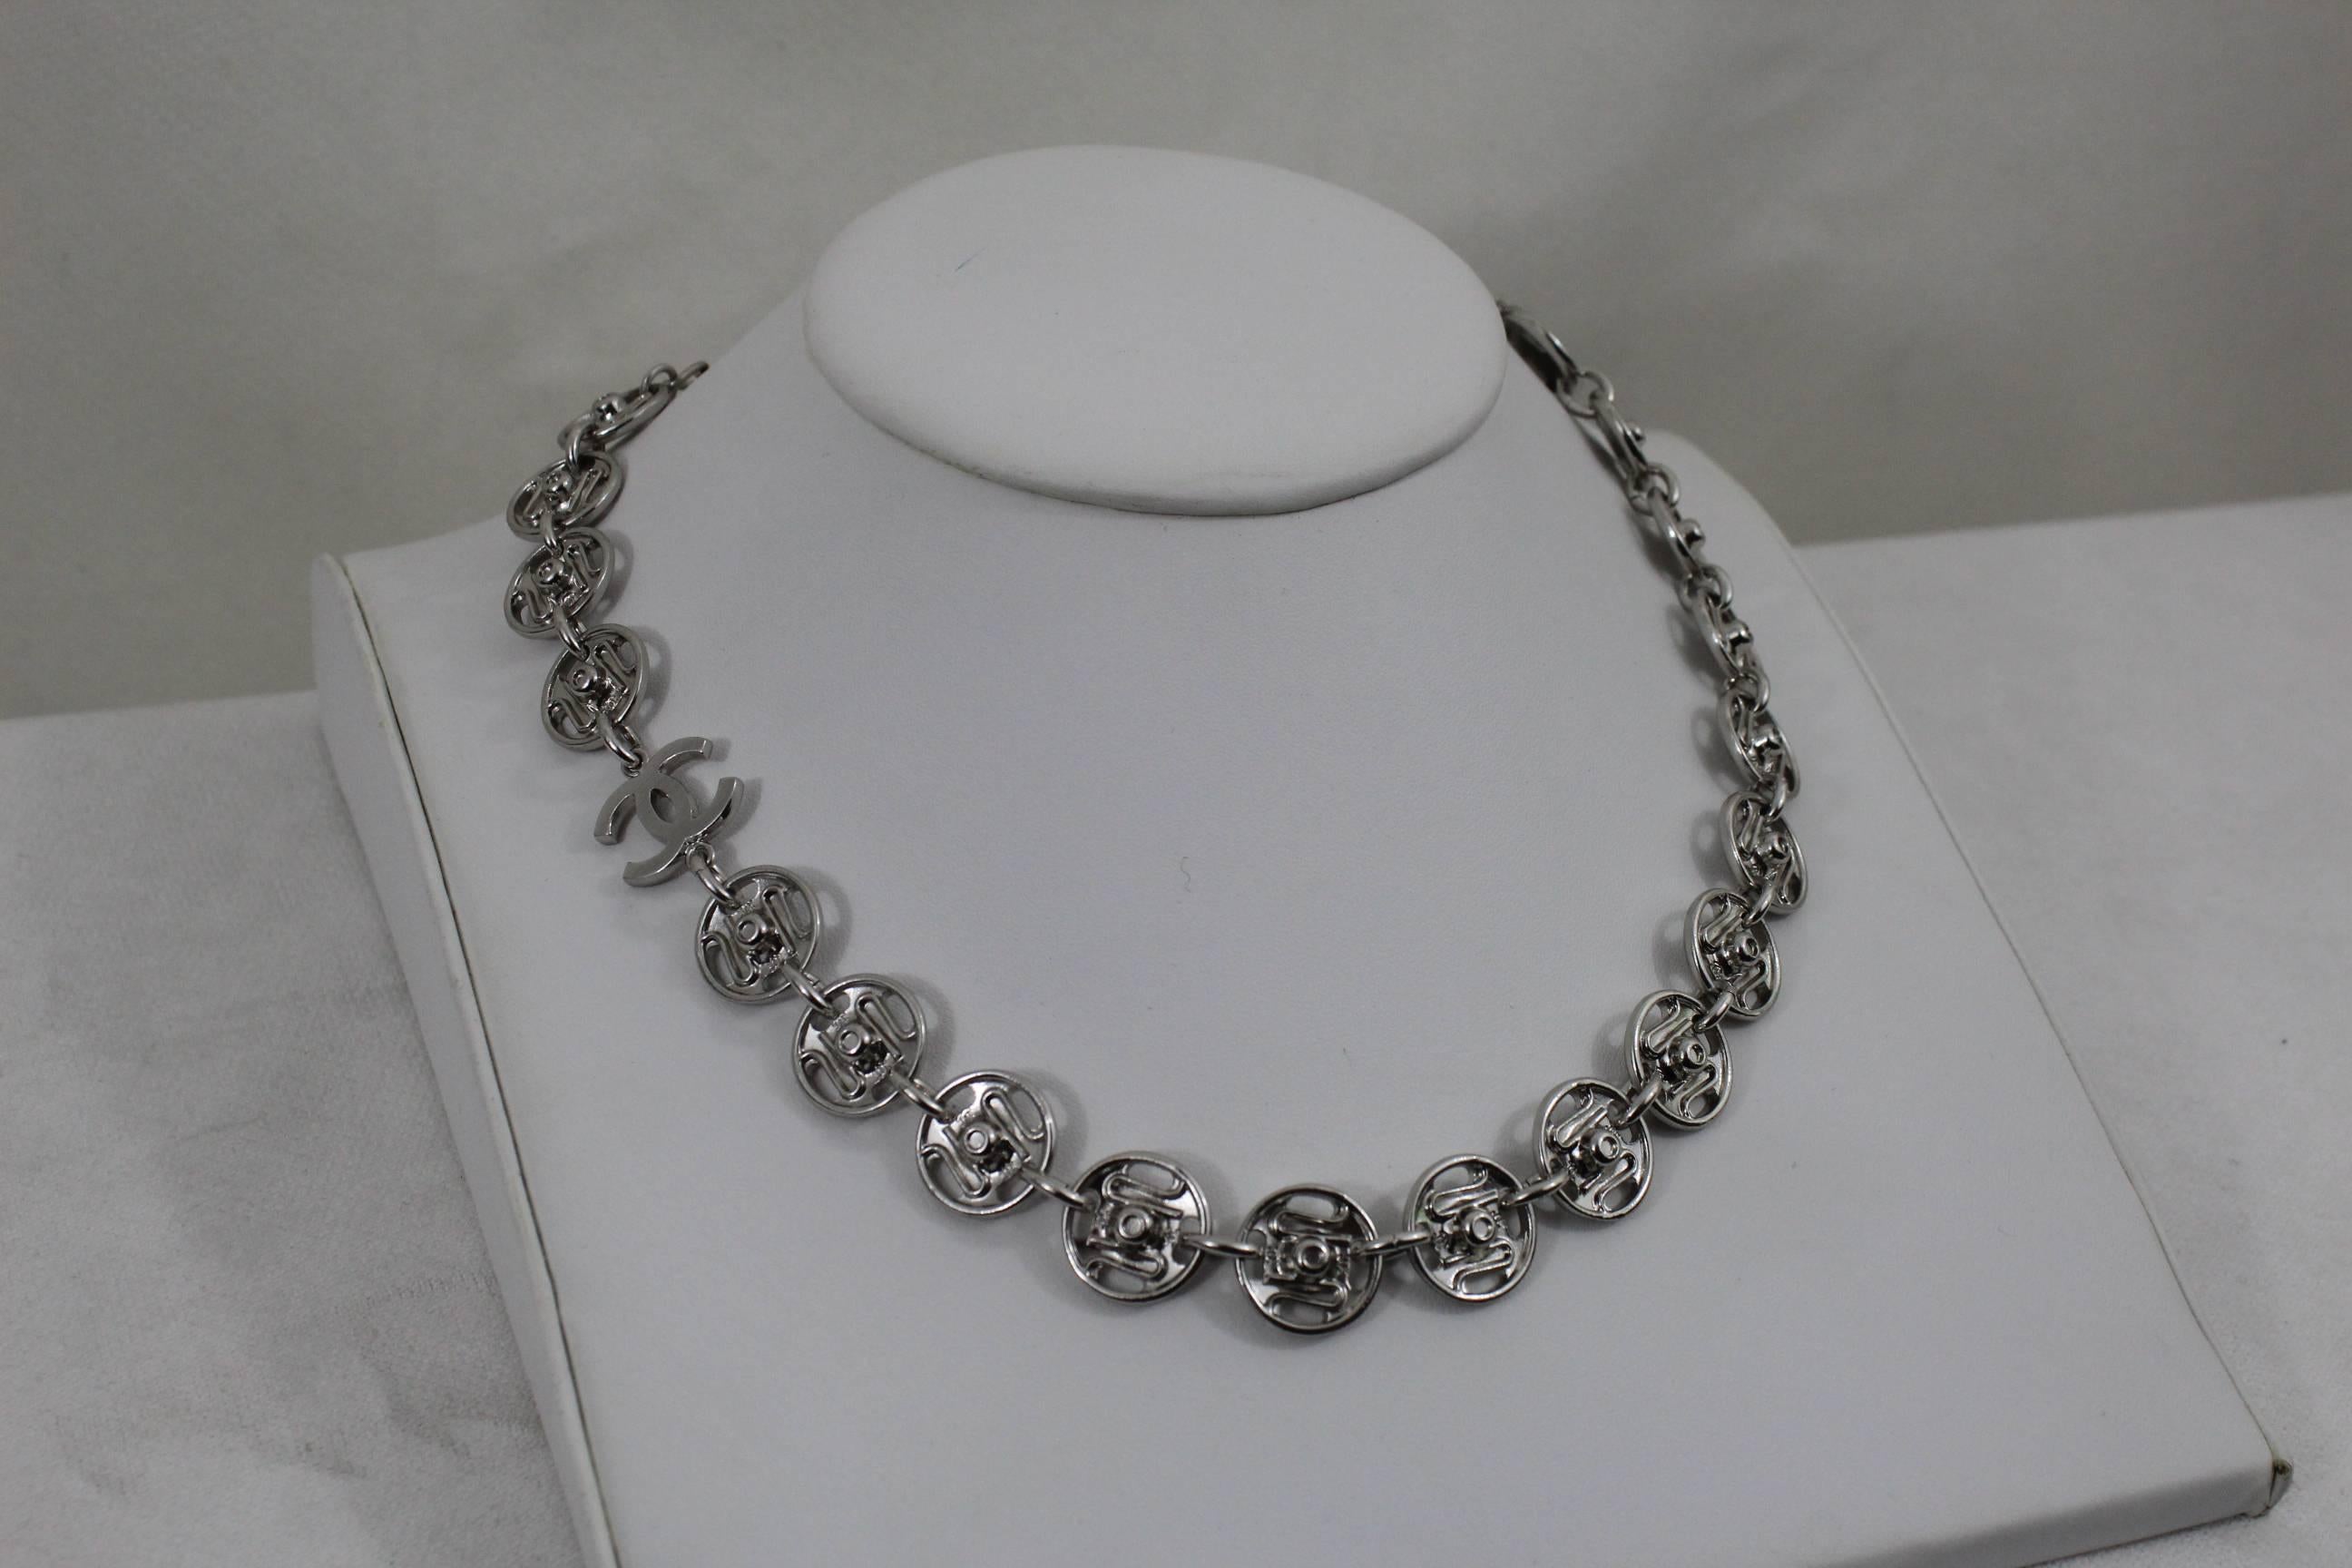 One already sold, this is the last one available.

Nice Chanel Necklace in stainless steel with charms representing pression buttons.

This have been seen in the catwalk during the fashion show.

Total lenght 22 inches